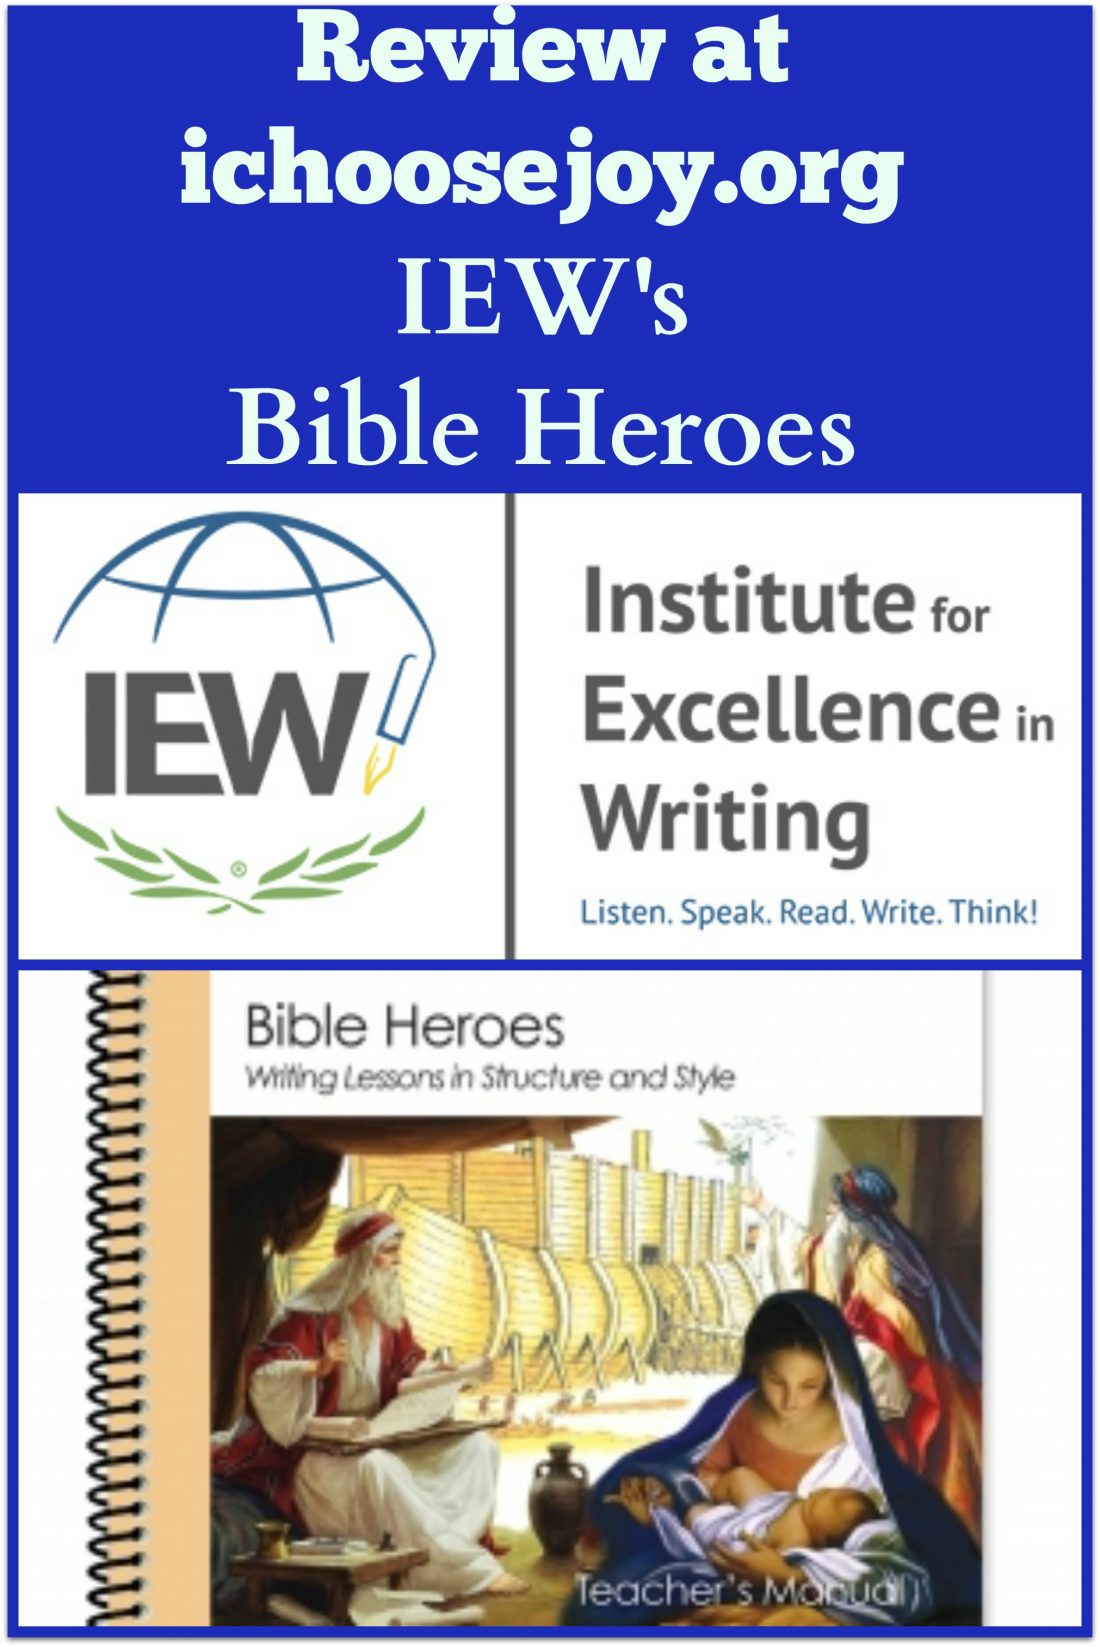 IEW Bible Heroes review